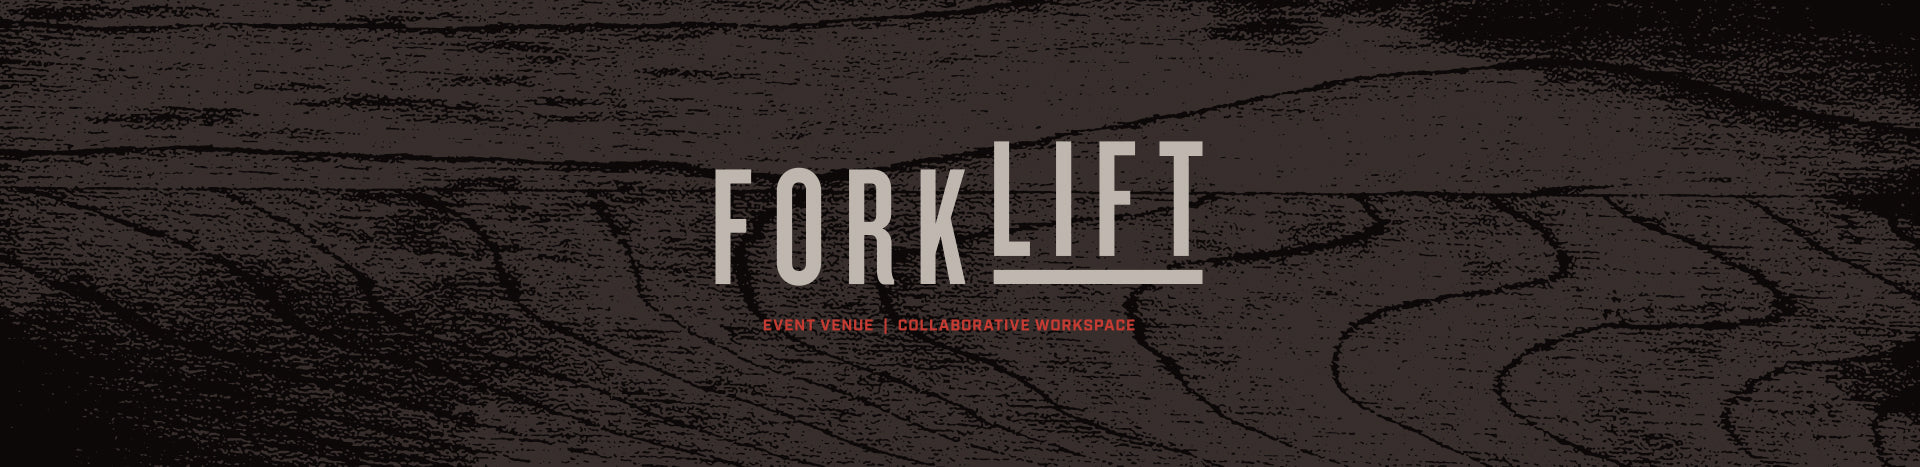 Events / Classes @ FORKLIFT